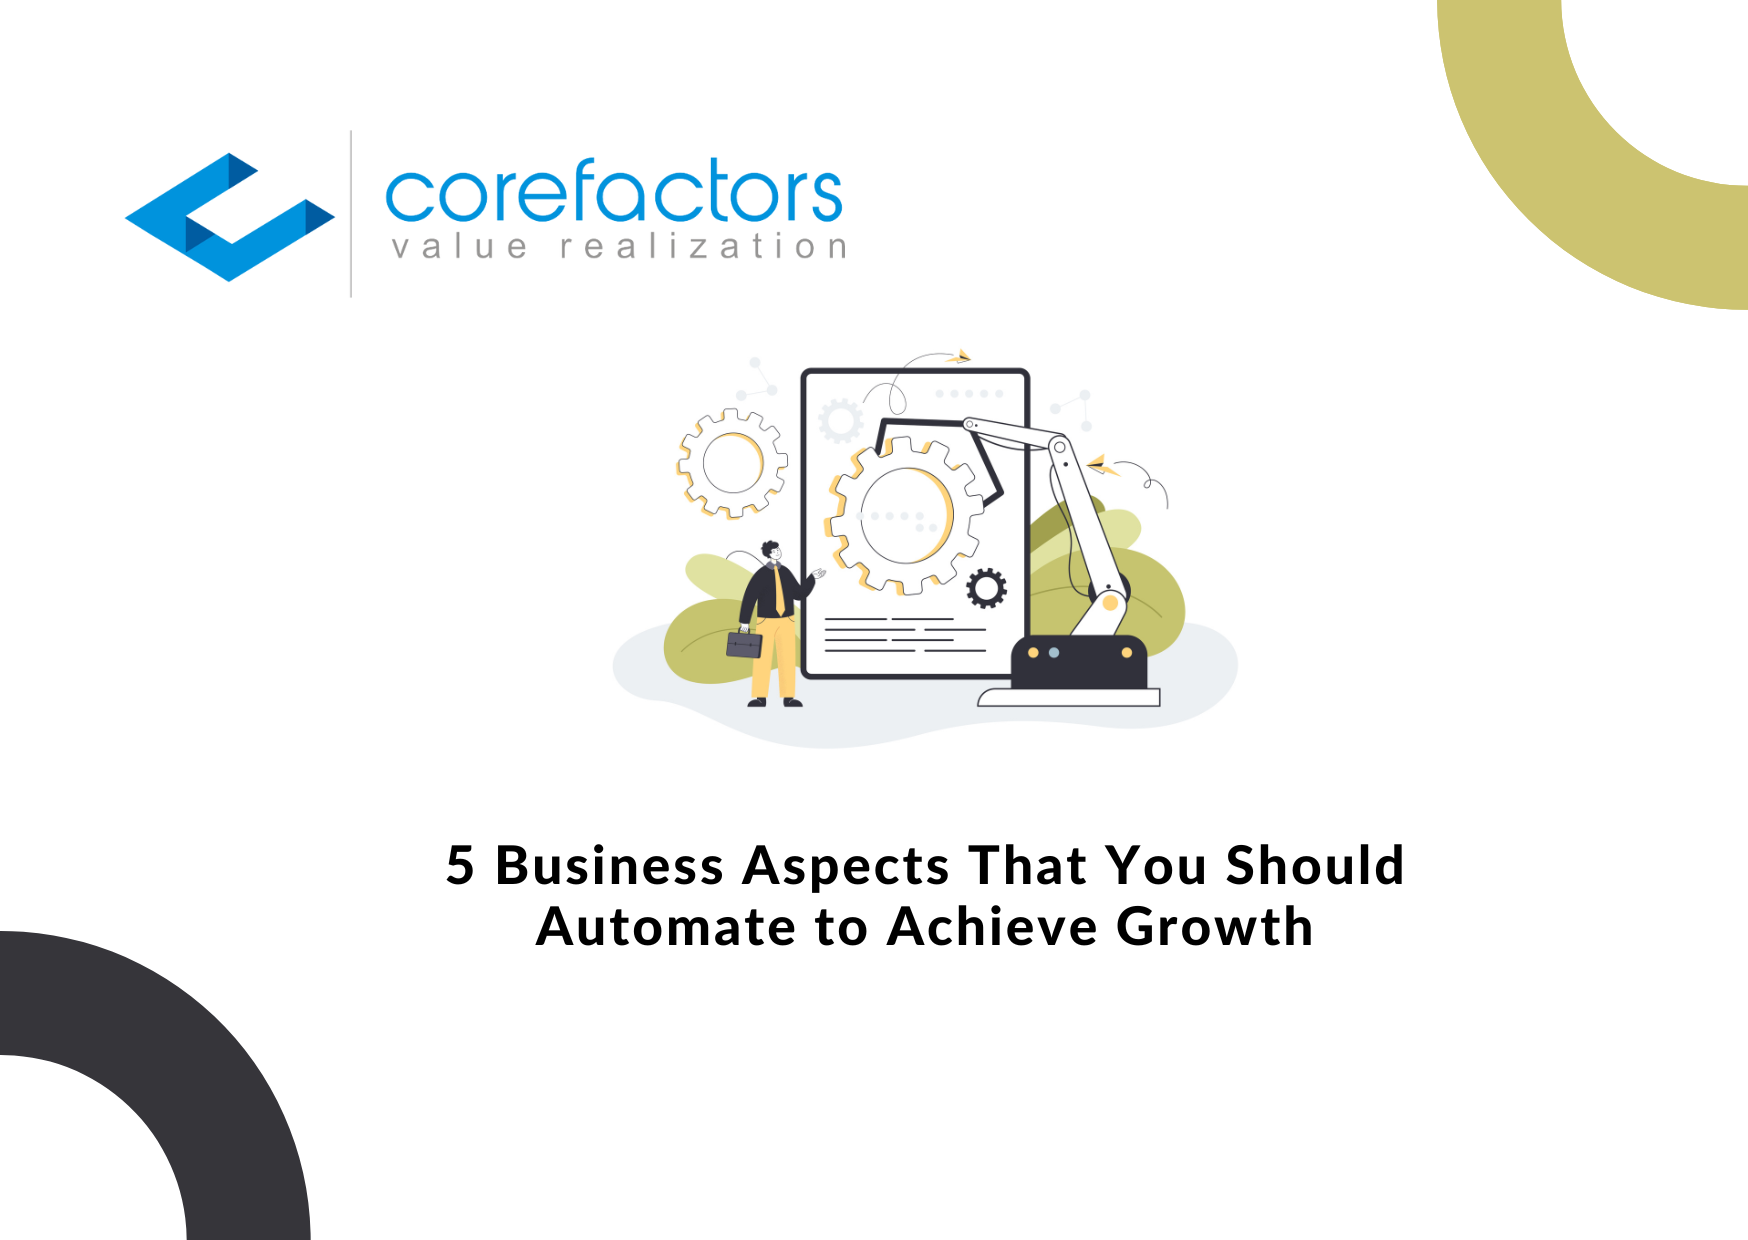 5 Business Aspects that you should automate for business growth